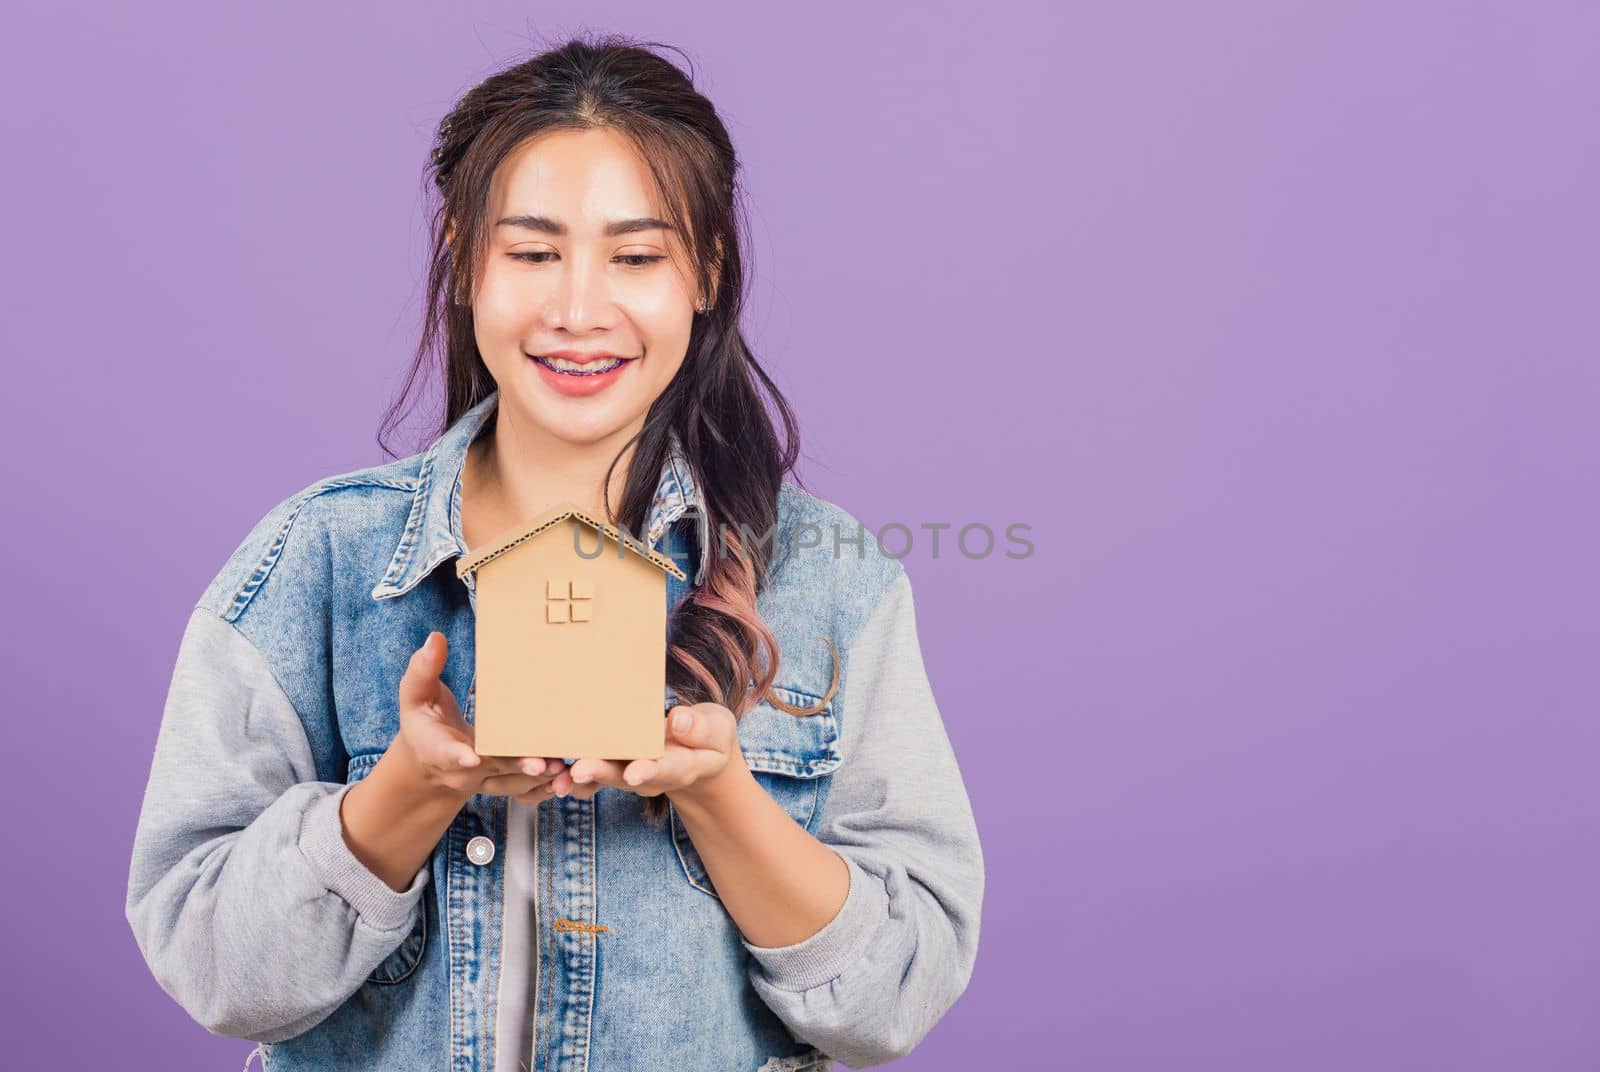 woman wear denim excited smiling holding house model on hand by Sorapop